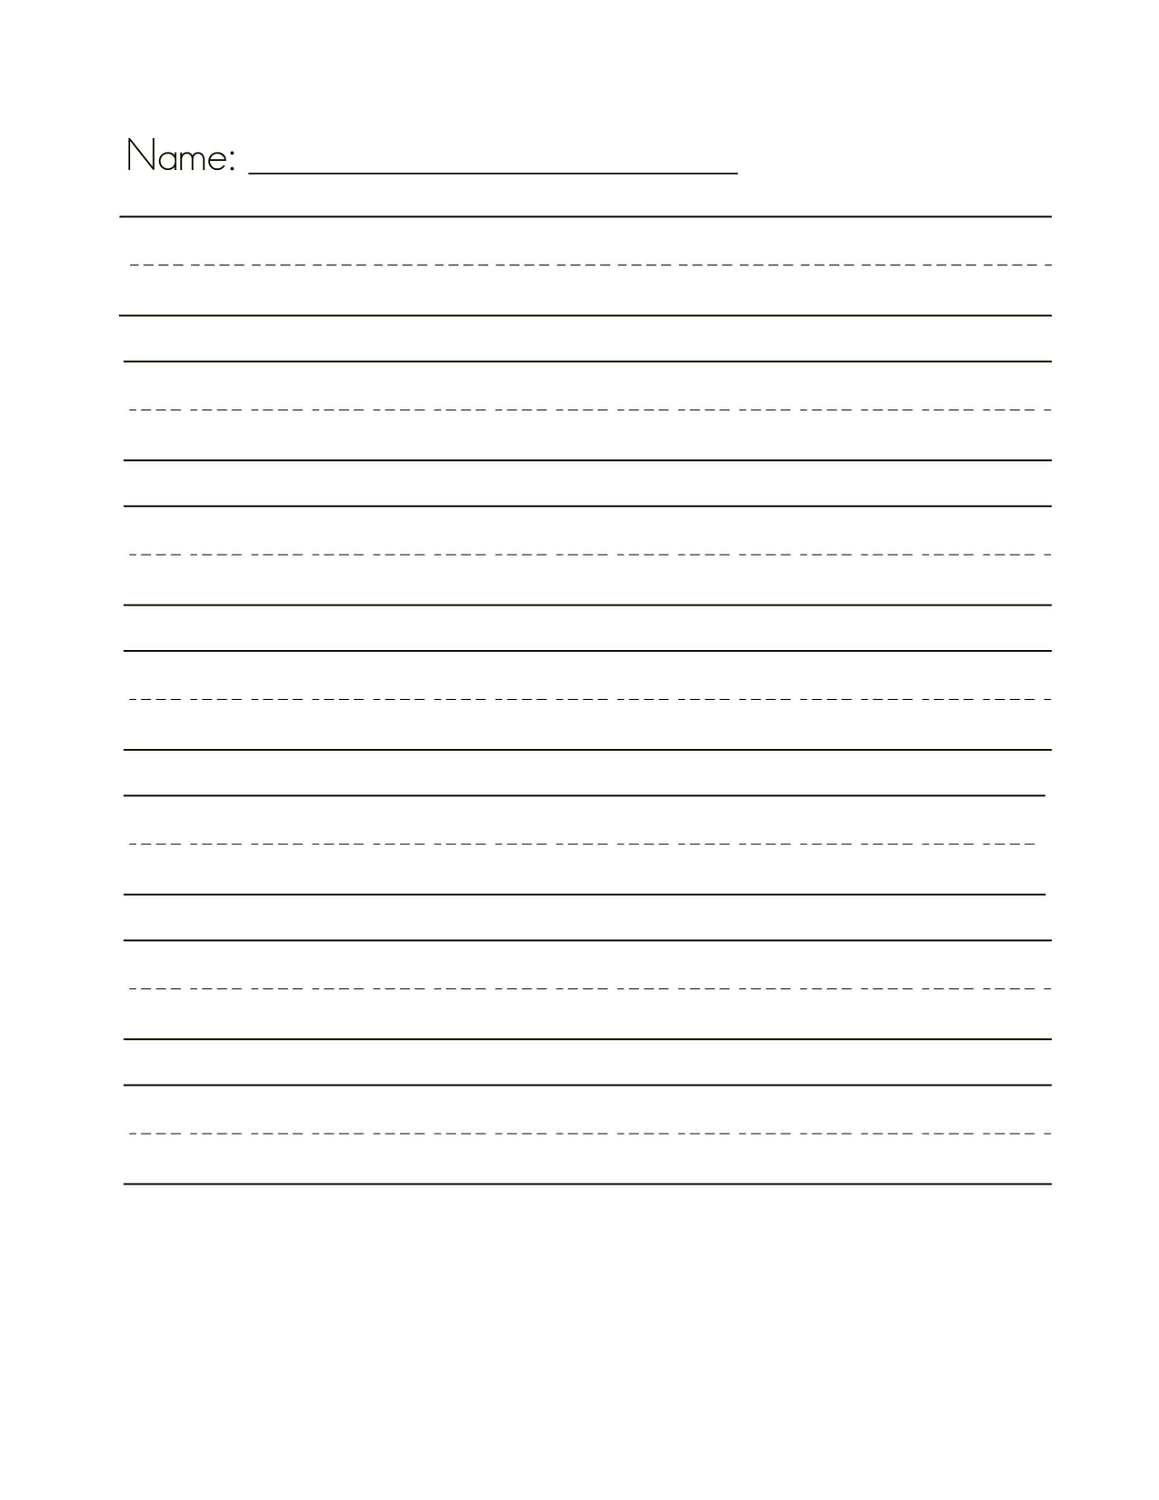 writing-paper-printable-handwriting-paper-do-you-want-to-write-and